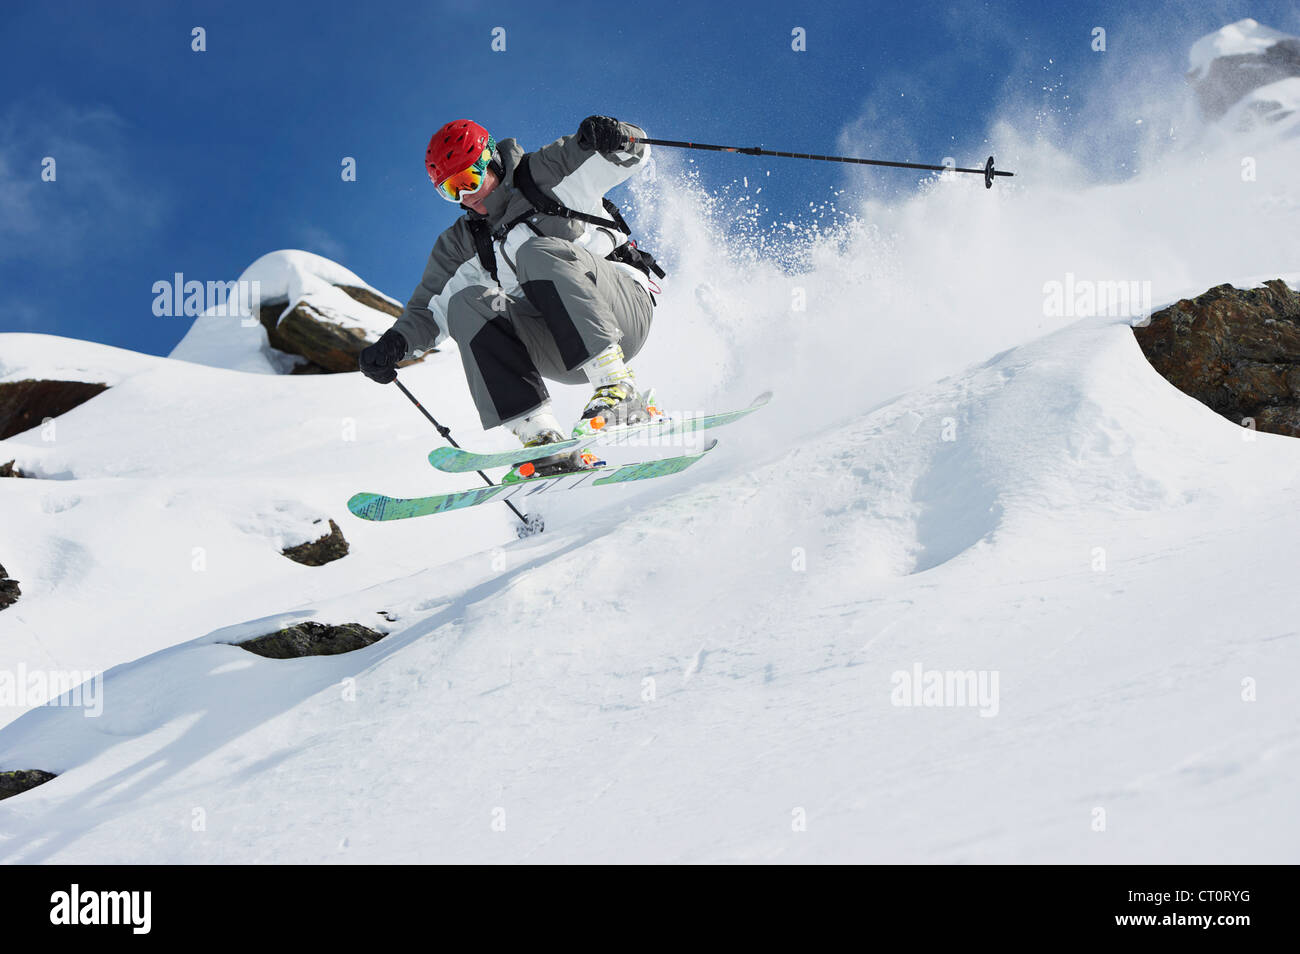 Skier jumping off snowy slope Stock Photo